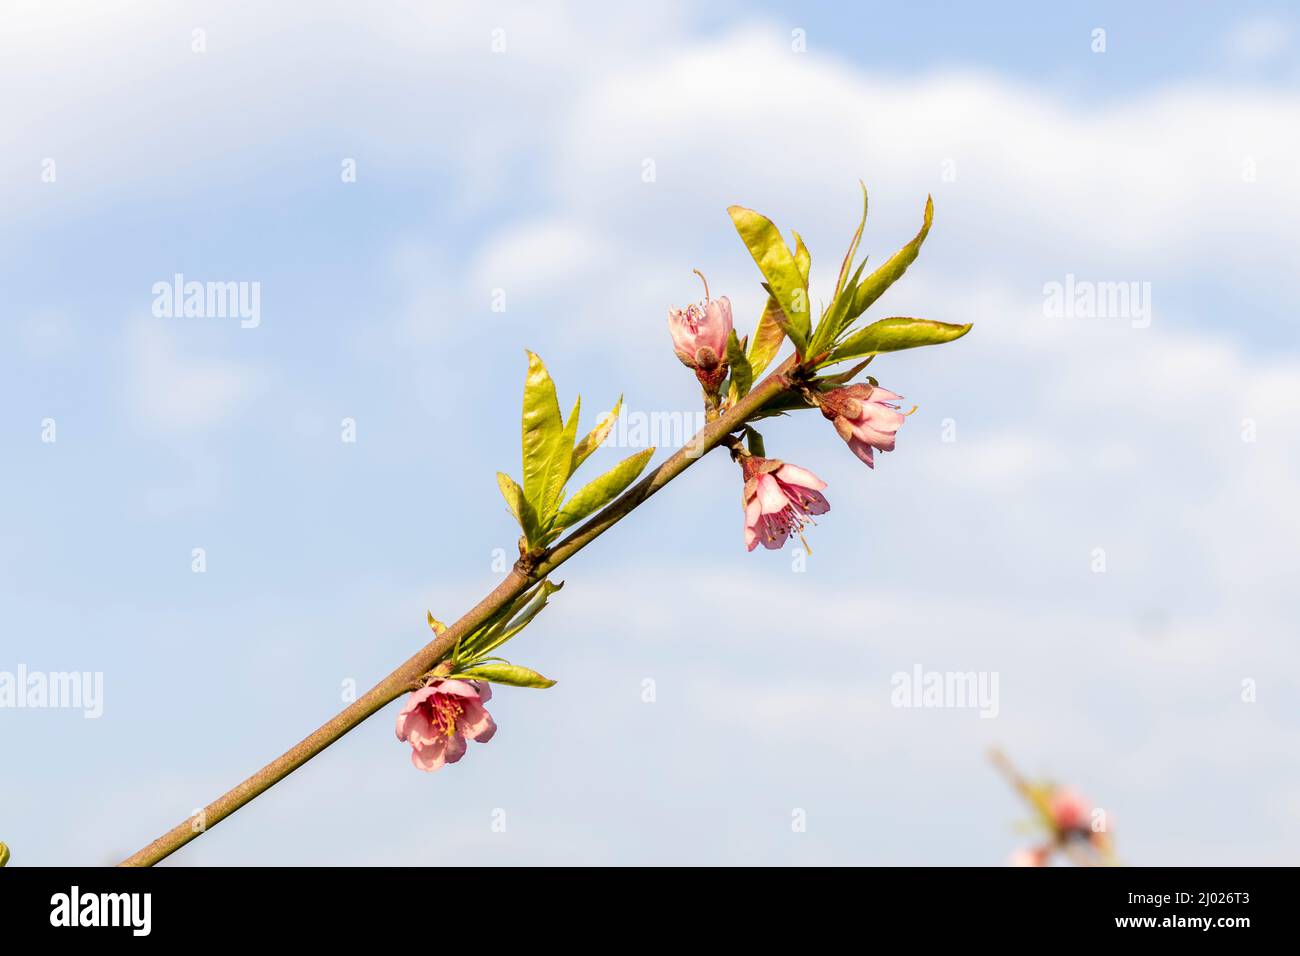 Peach tree branch with flowers Stock Photo